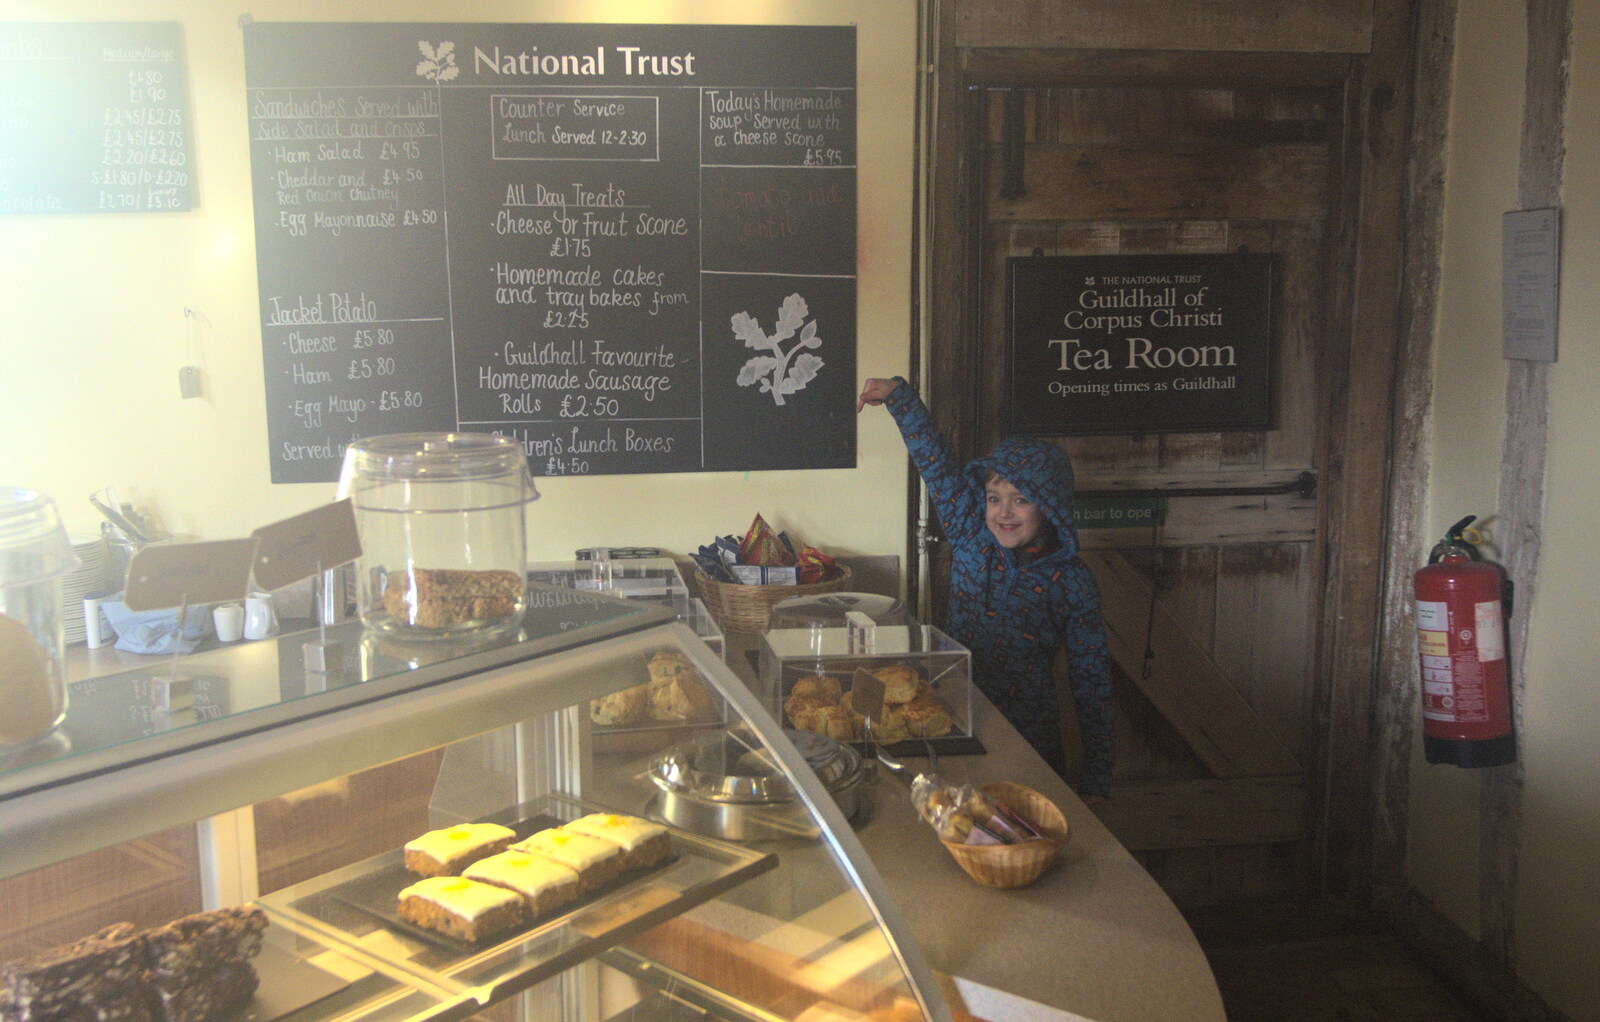 Fred points at something in the NT café from A Day in Lavenham, Suffolk - 22nd January 2017